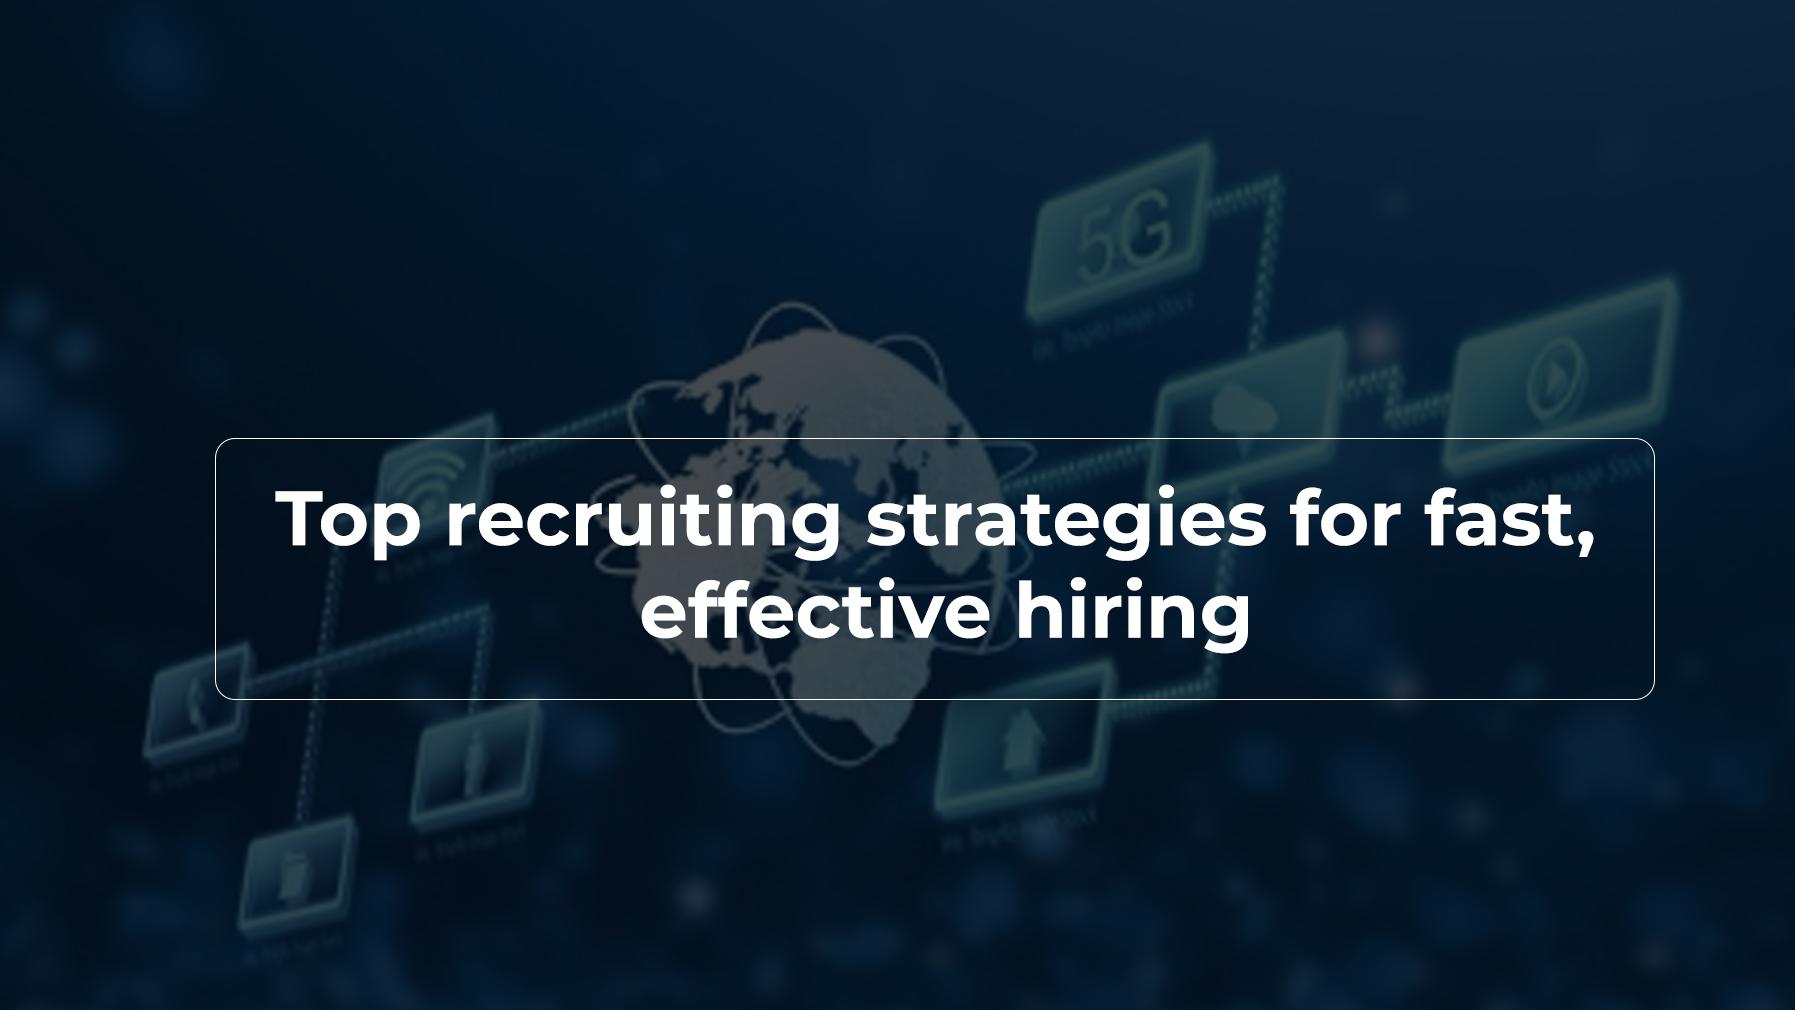 Top recruiting strategies for fast effective hiring